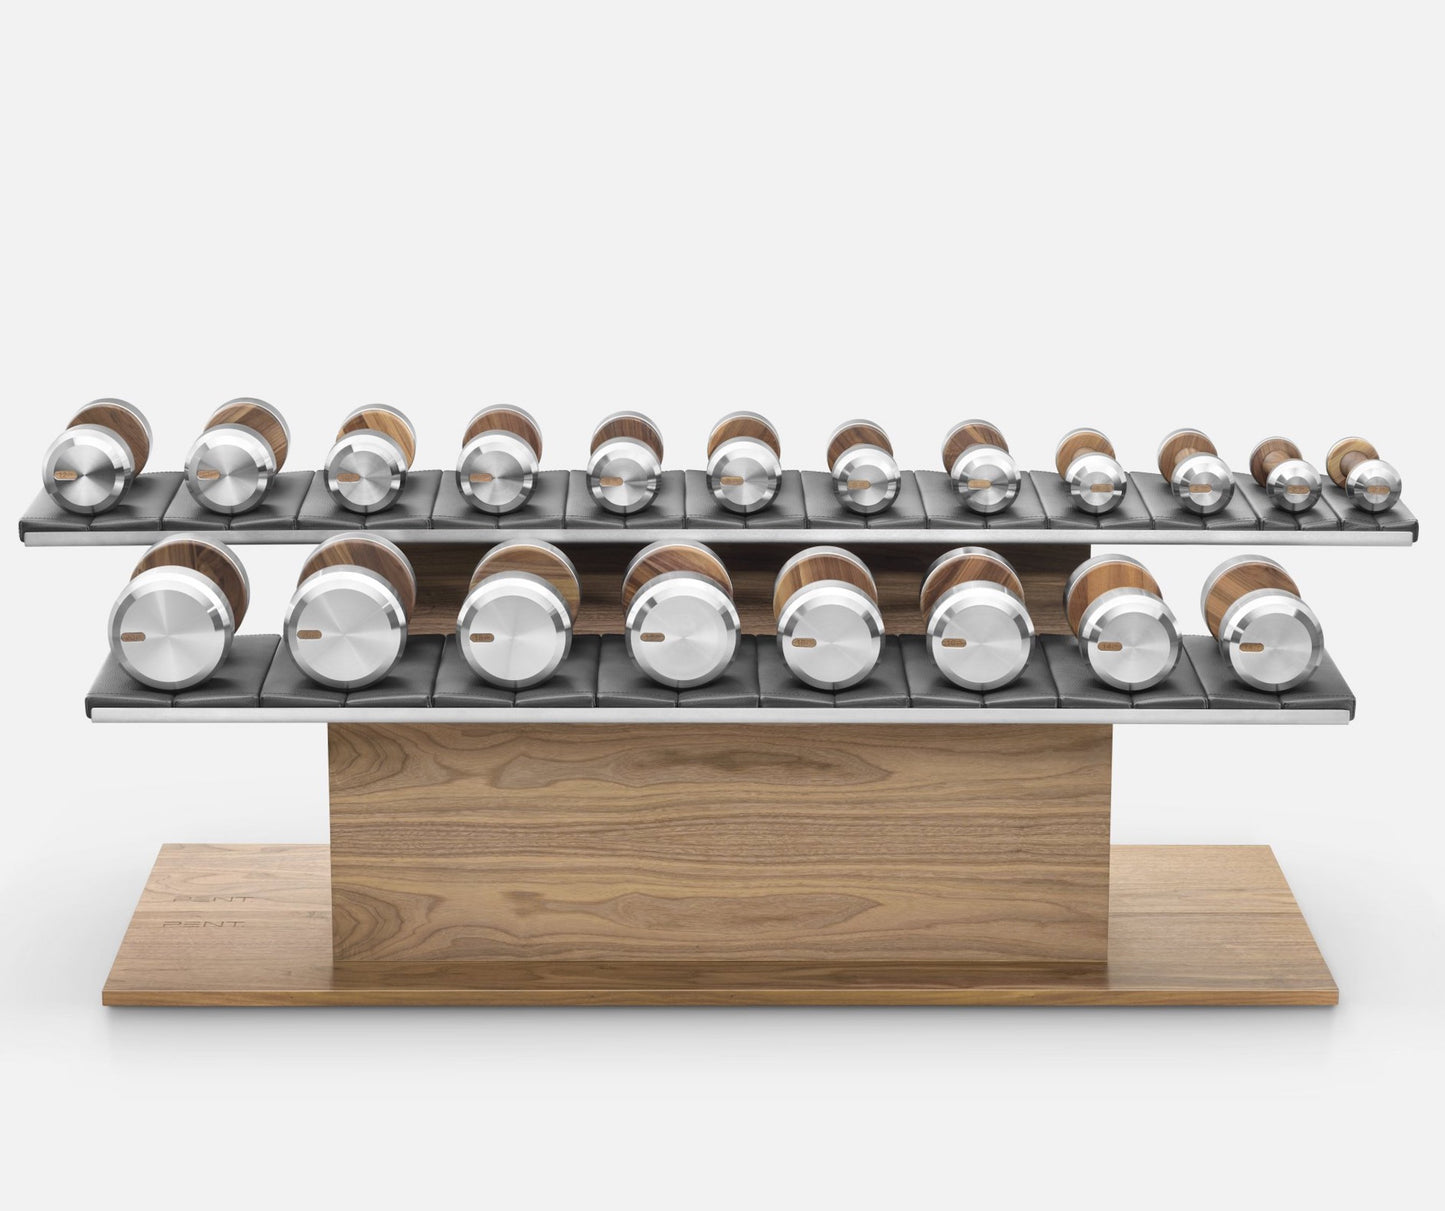 PENT Colmia Luxury Dumbbell Horizontal Set, featuring customisable options in various weight ranges, wood types, and leather combinations.